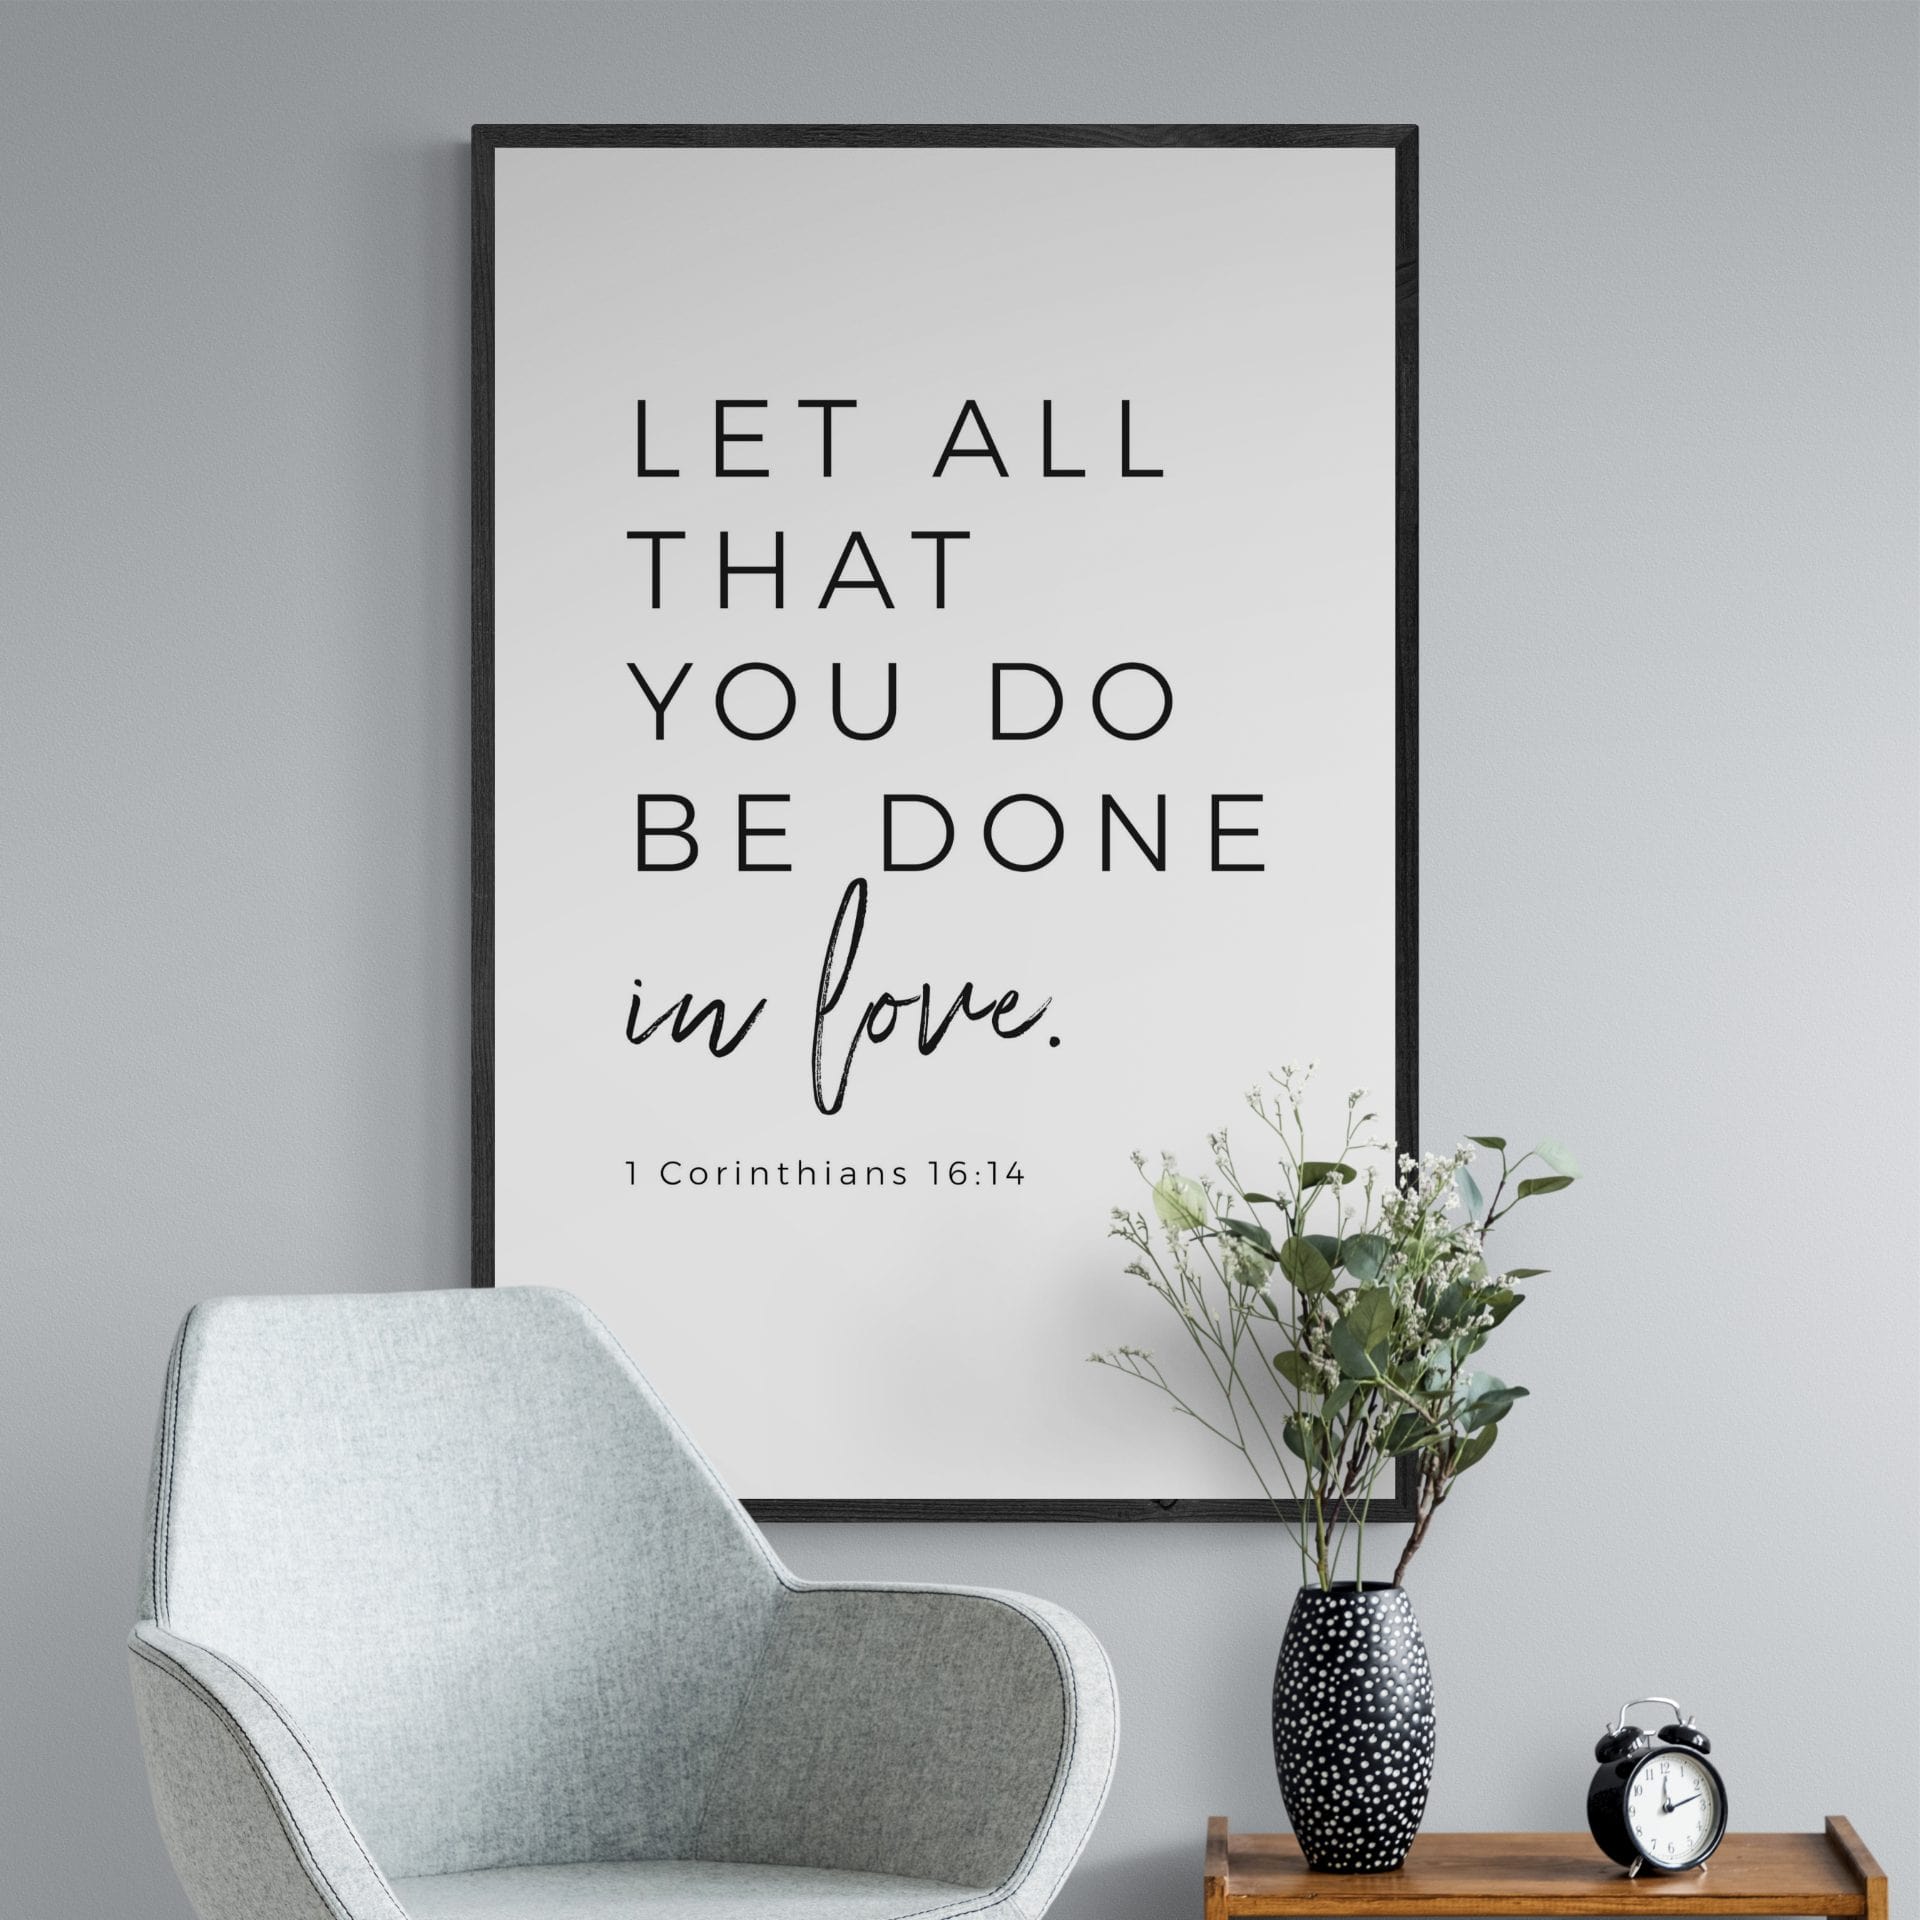 Living Words Wall Decor Let all that you do